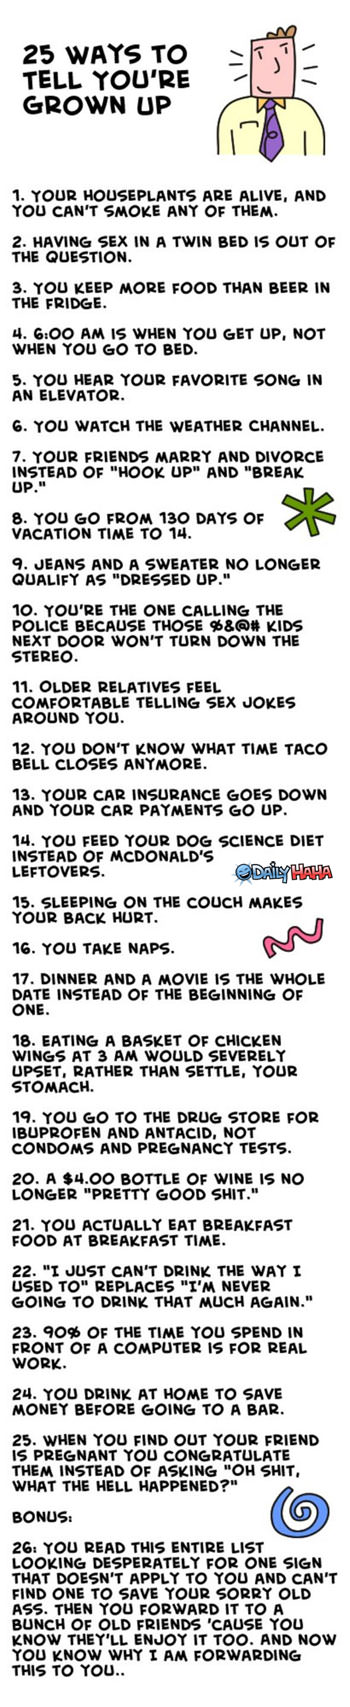 25 ways to tell your old